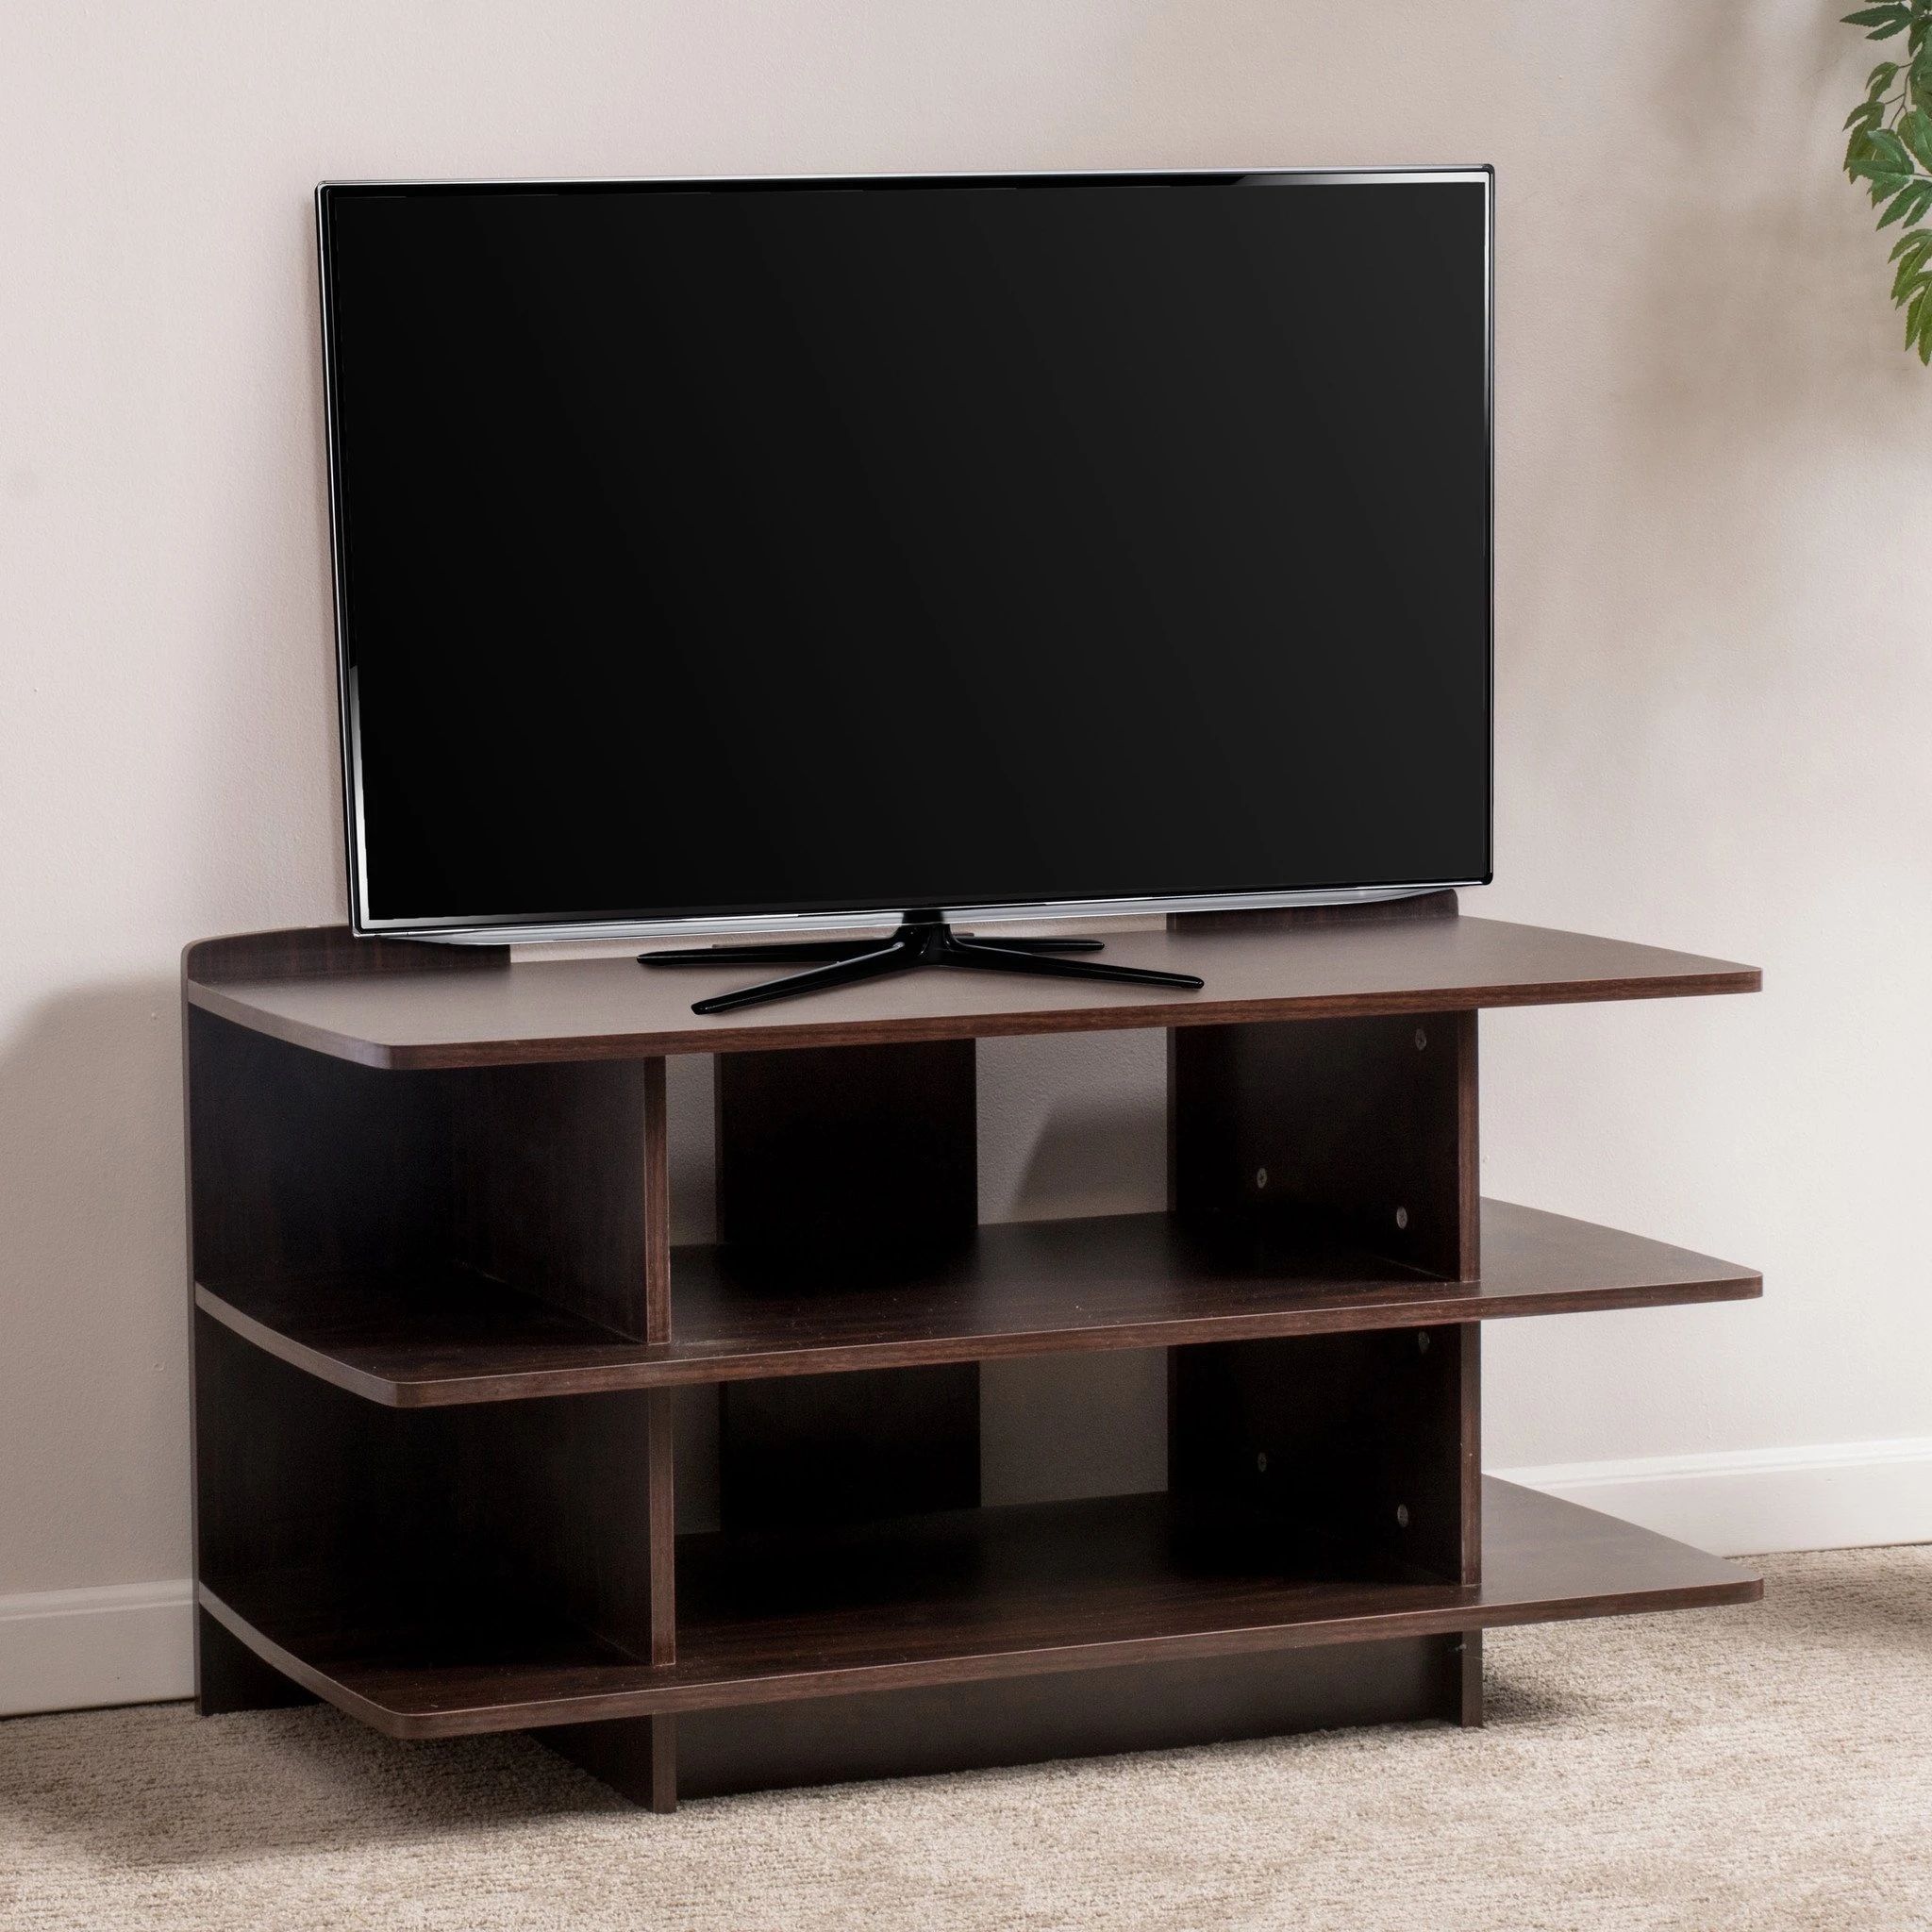 Ian 3 Tier Dark Walnut Wood Tv Console Stand In Tv Stands From With Tier Stand Console Cabinets (Gallery 3 of 20)